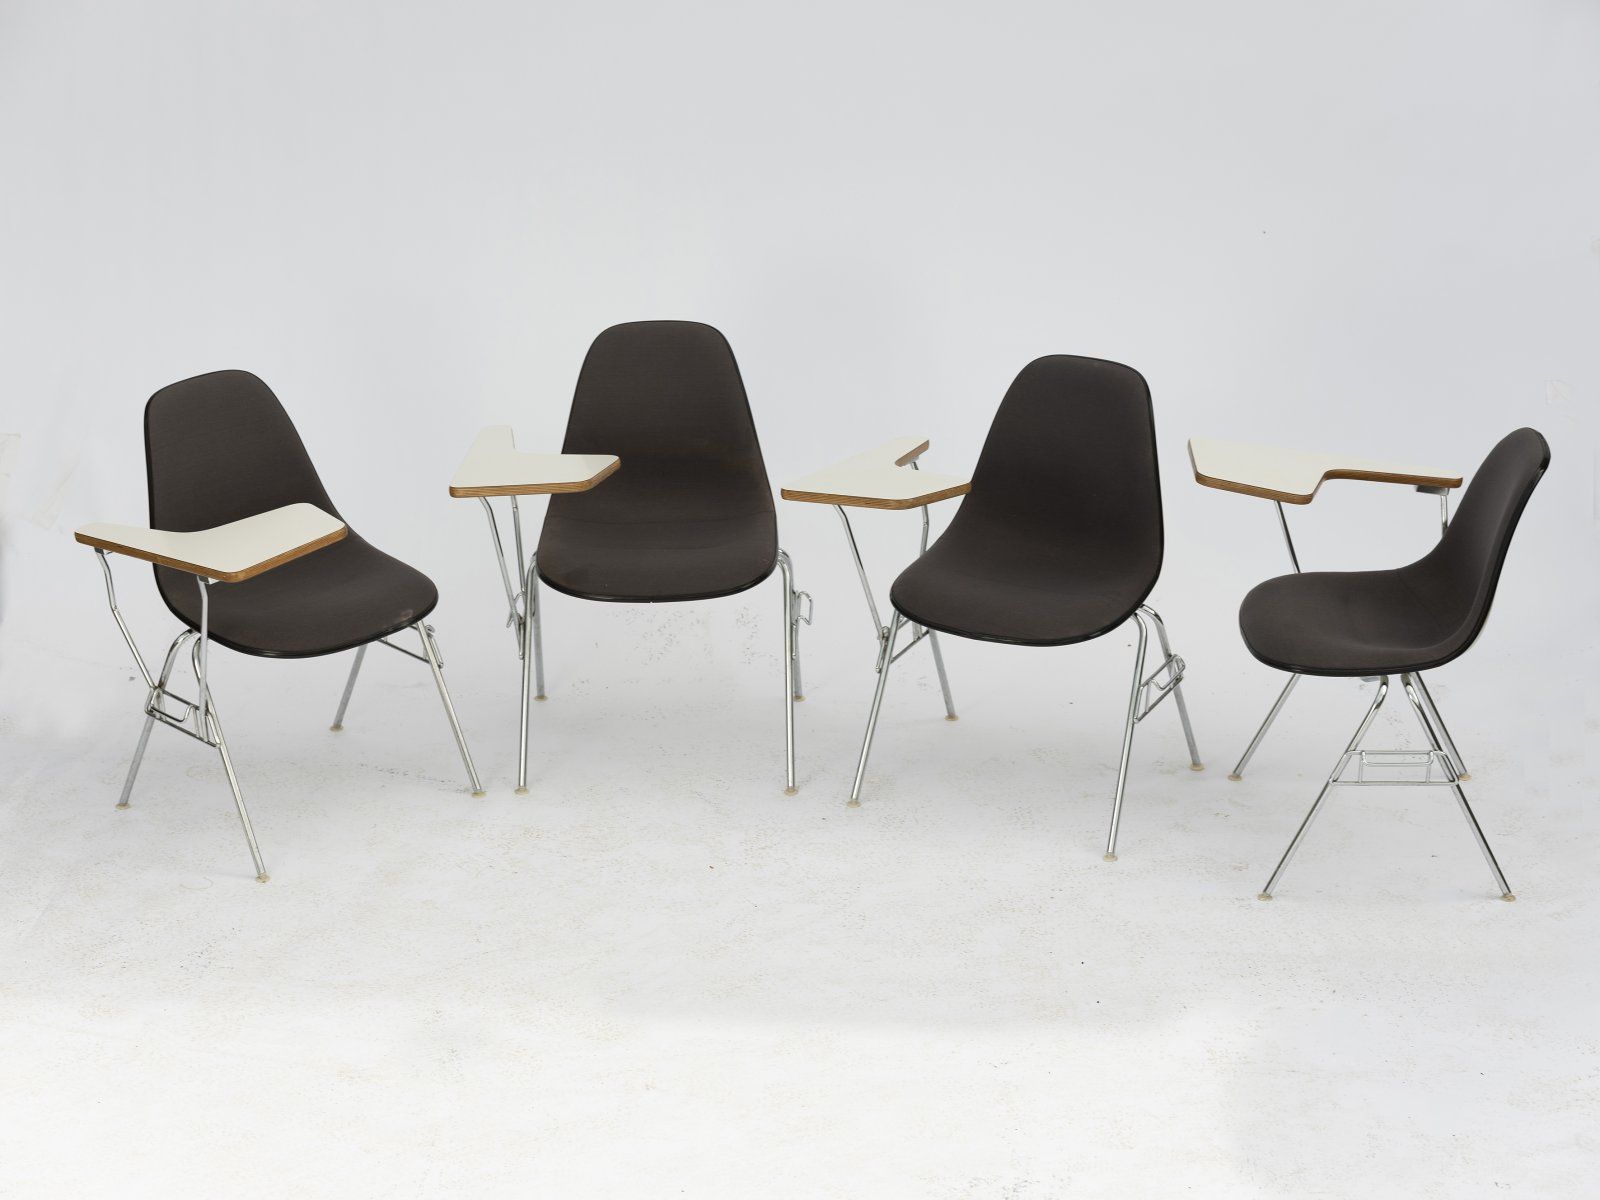 Null Charles Eames, 4 '0715' desk chairs, c. 1955, H. 80.5 x 65 x 64 cm. Made by&hellip;